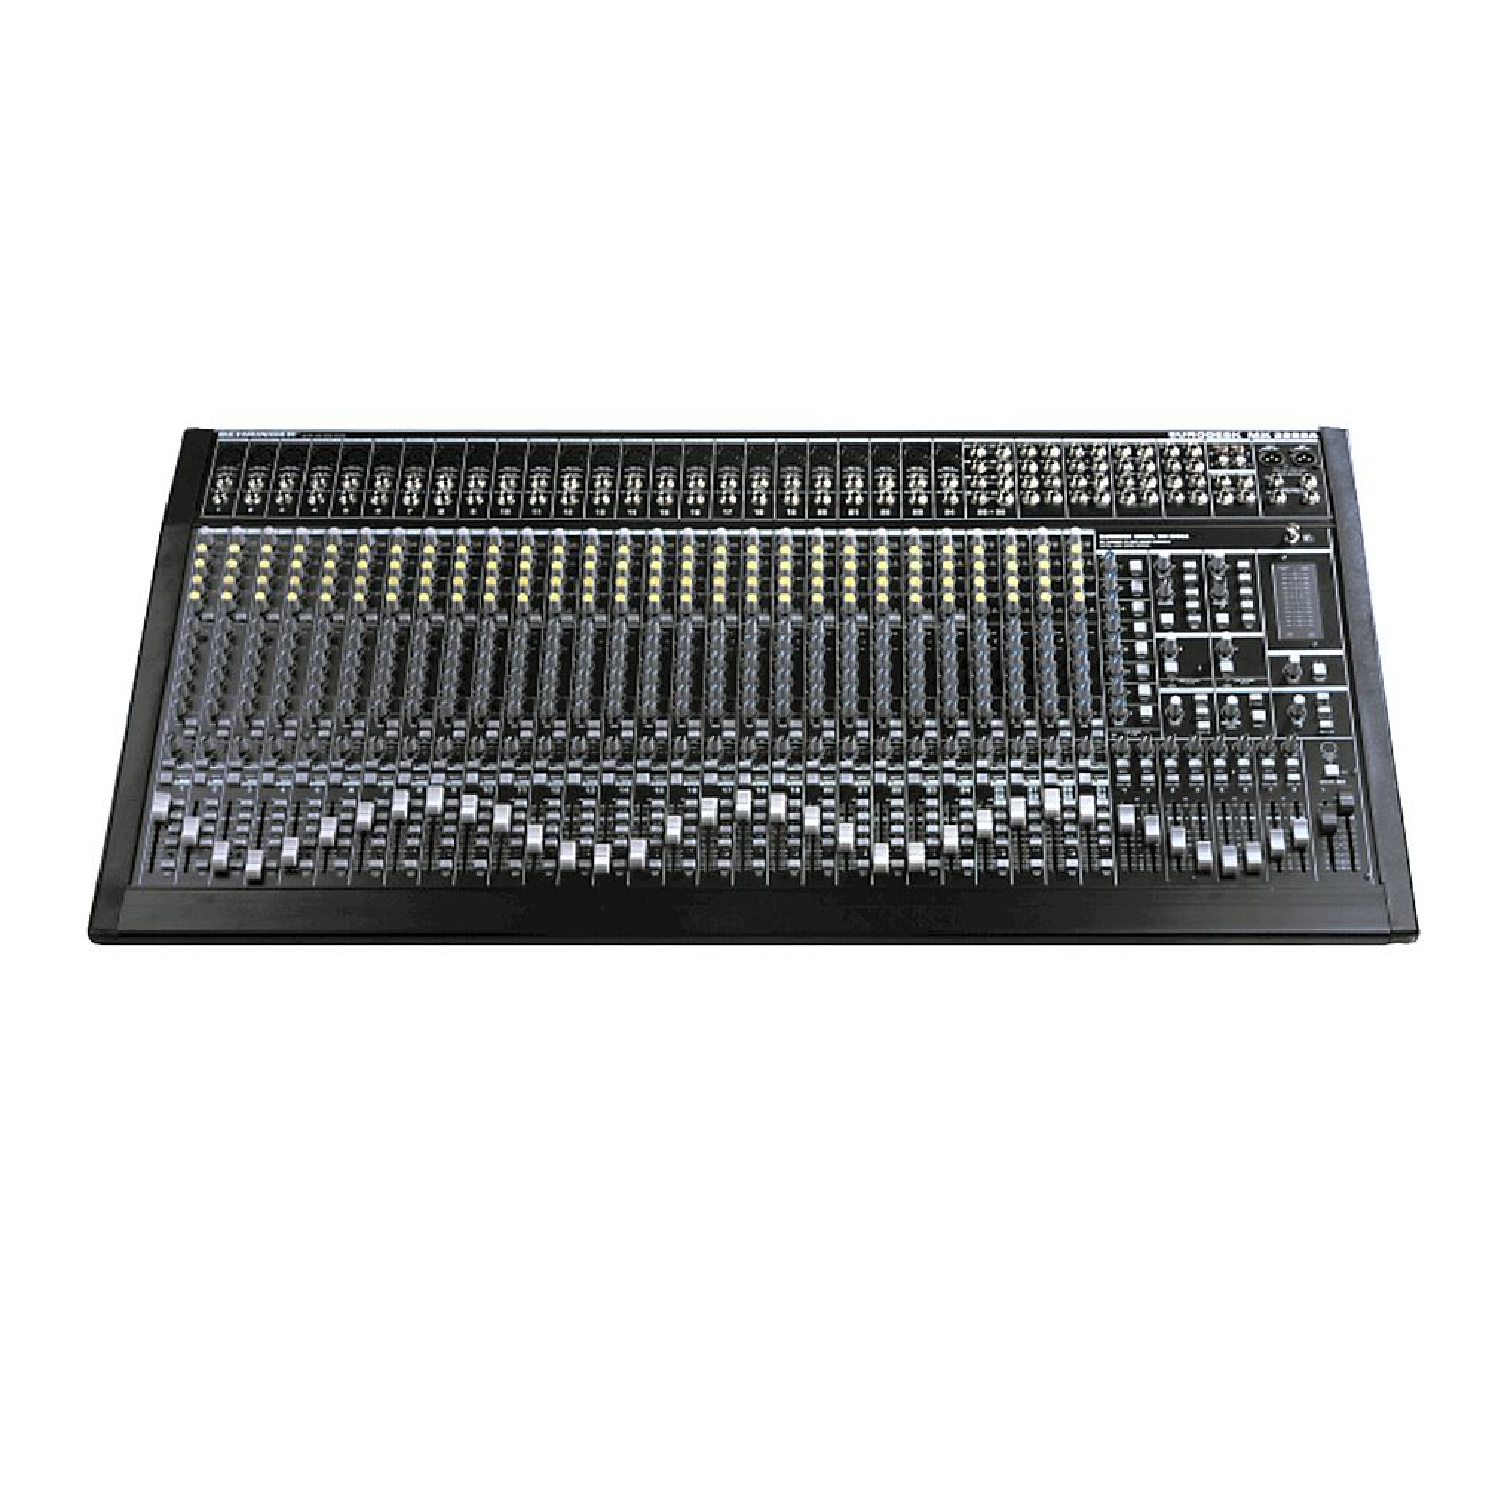 32 Channel 8 Bus Mixing Console, 24 Mono Inputs, 4 Stereo Inputs w/ Panthom Power Built in Routable Talkback Mic and BNC Lamp Socket MX 3282A behringer